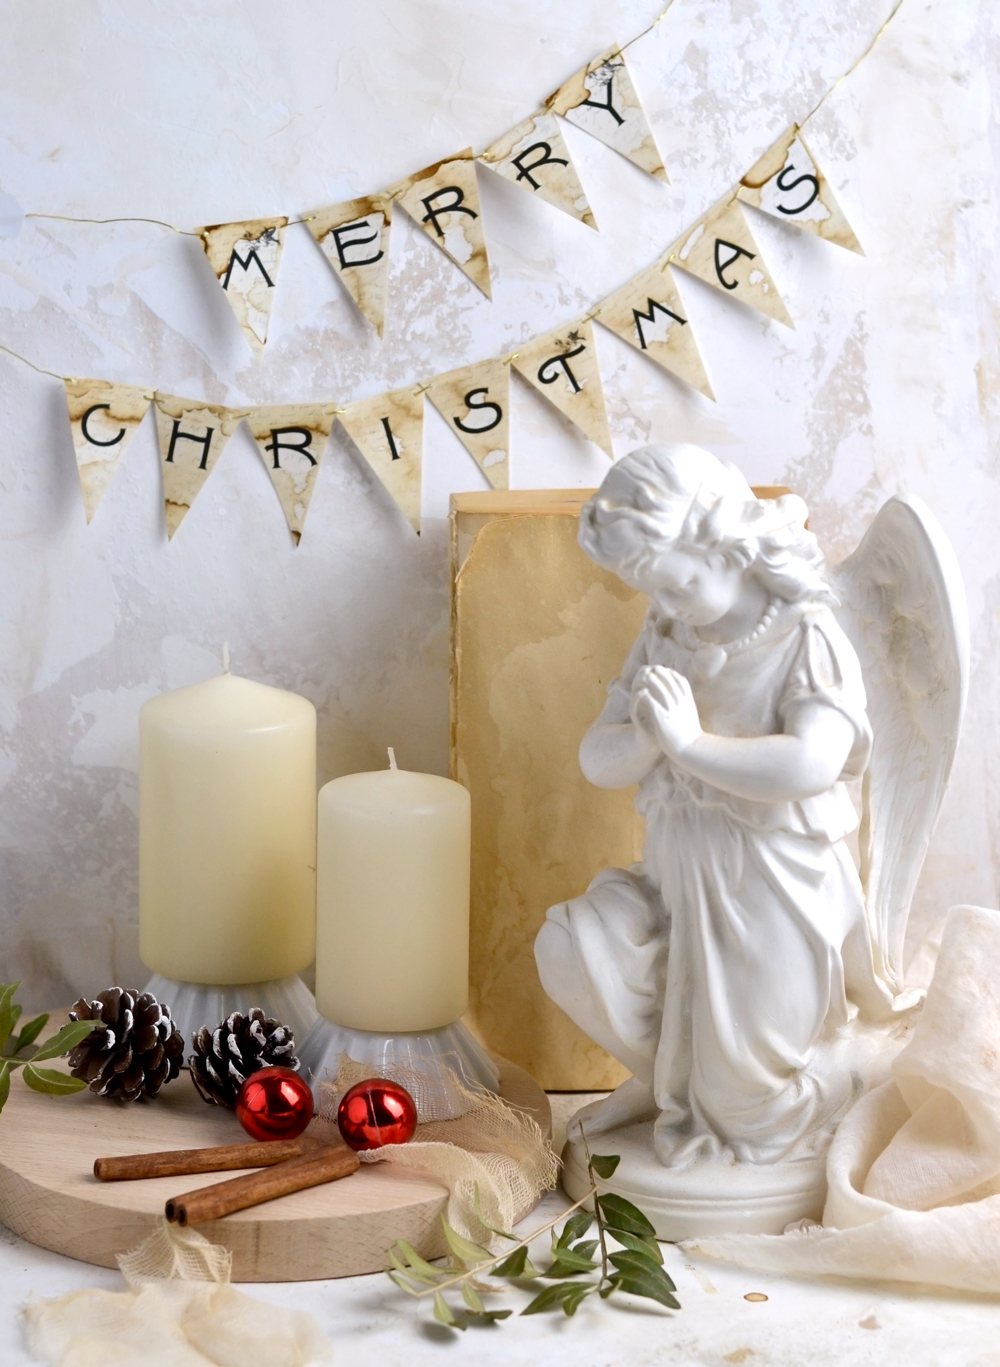 How to create a Christmas vignette using the Merry Christmas banner